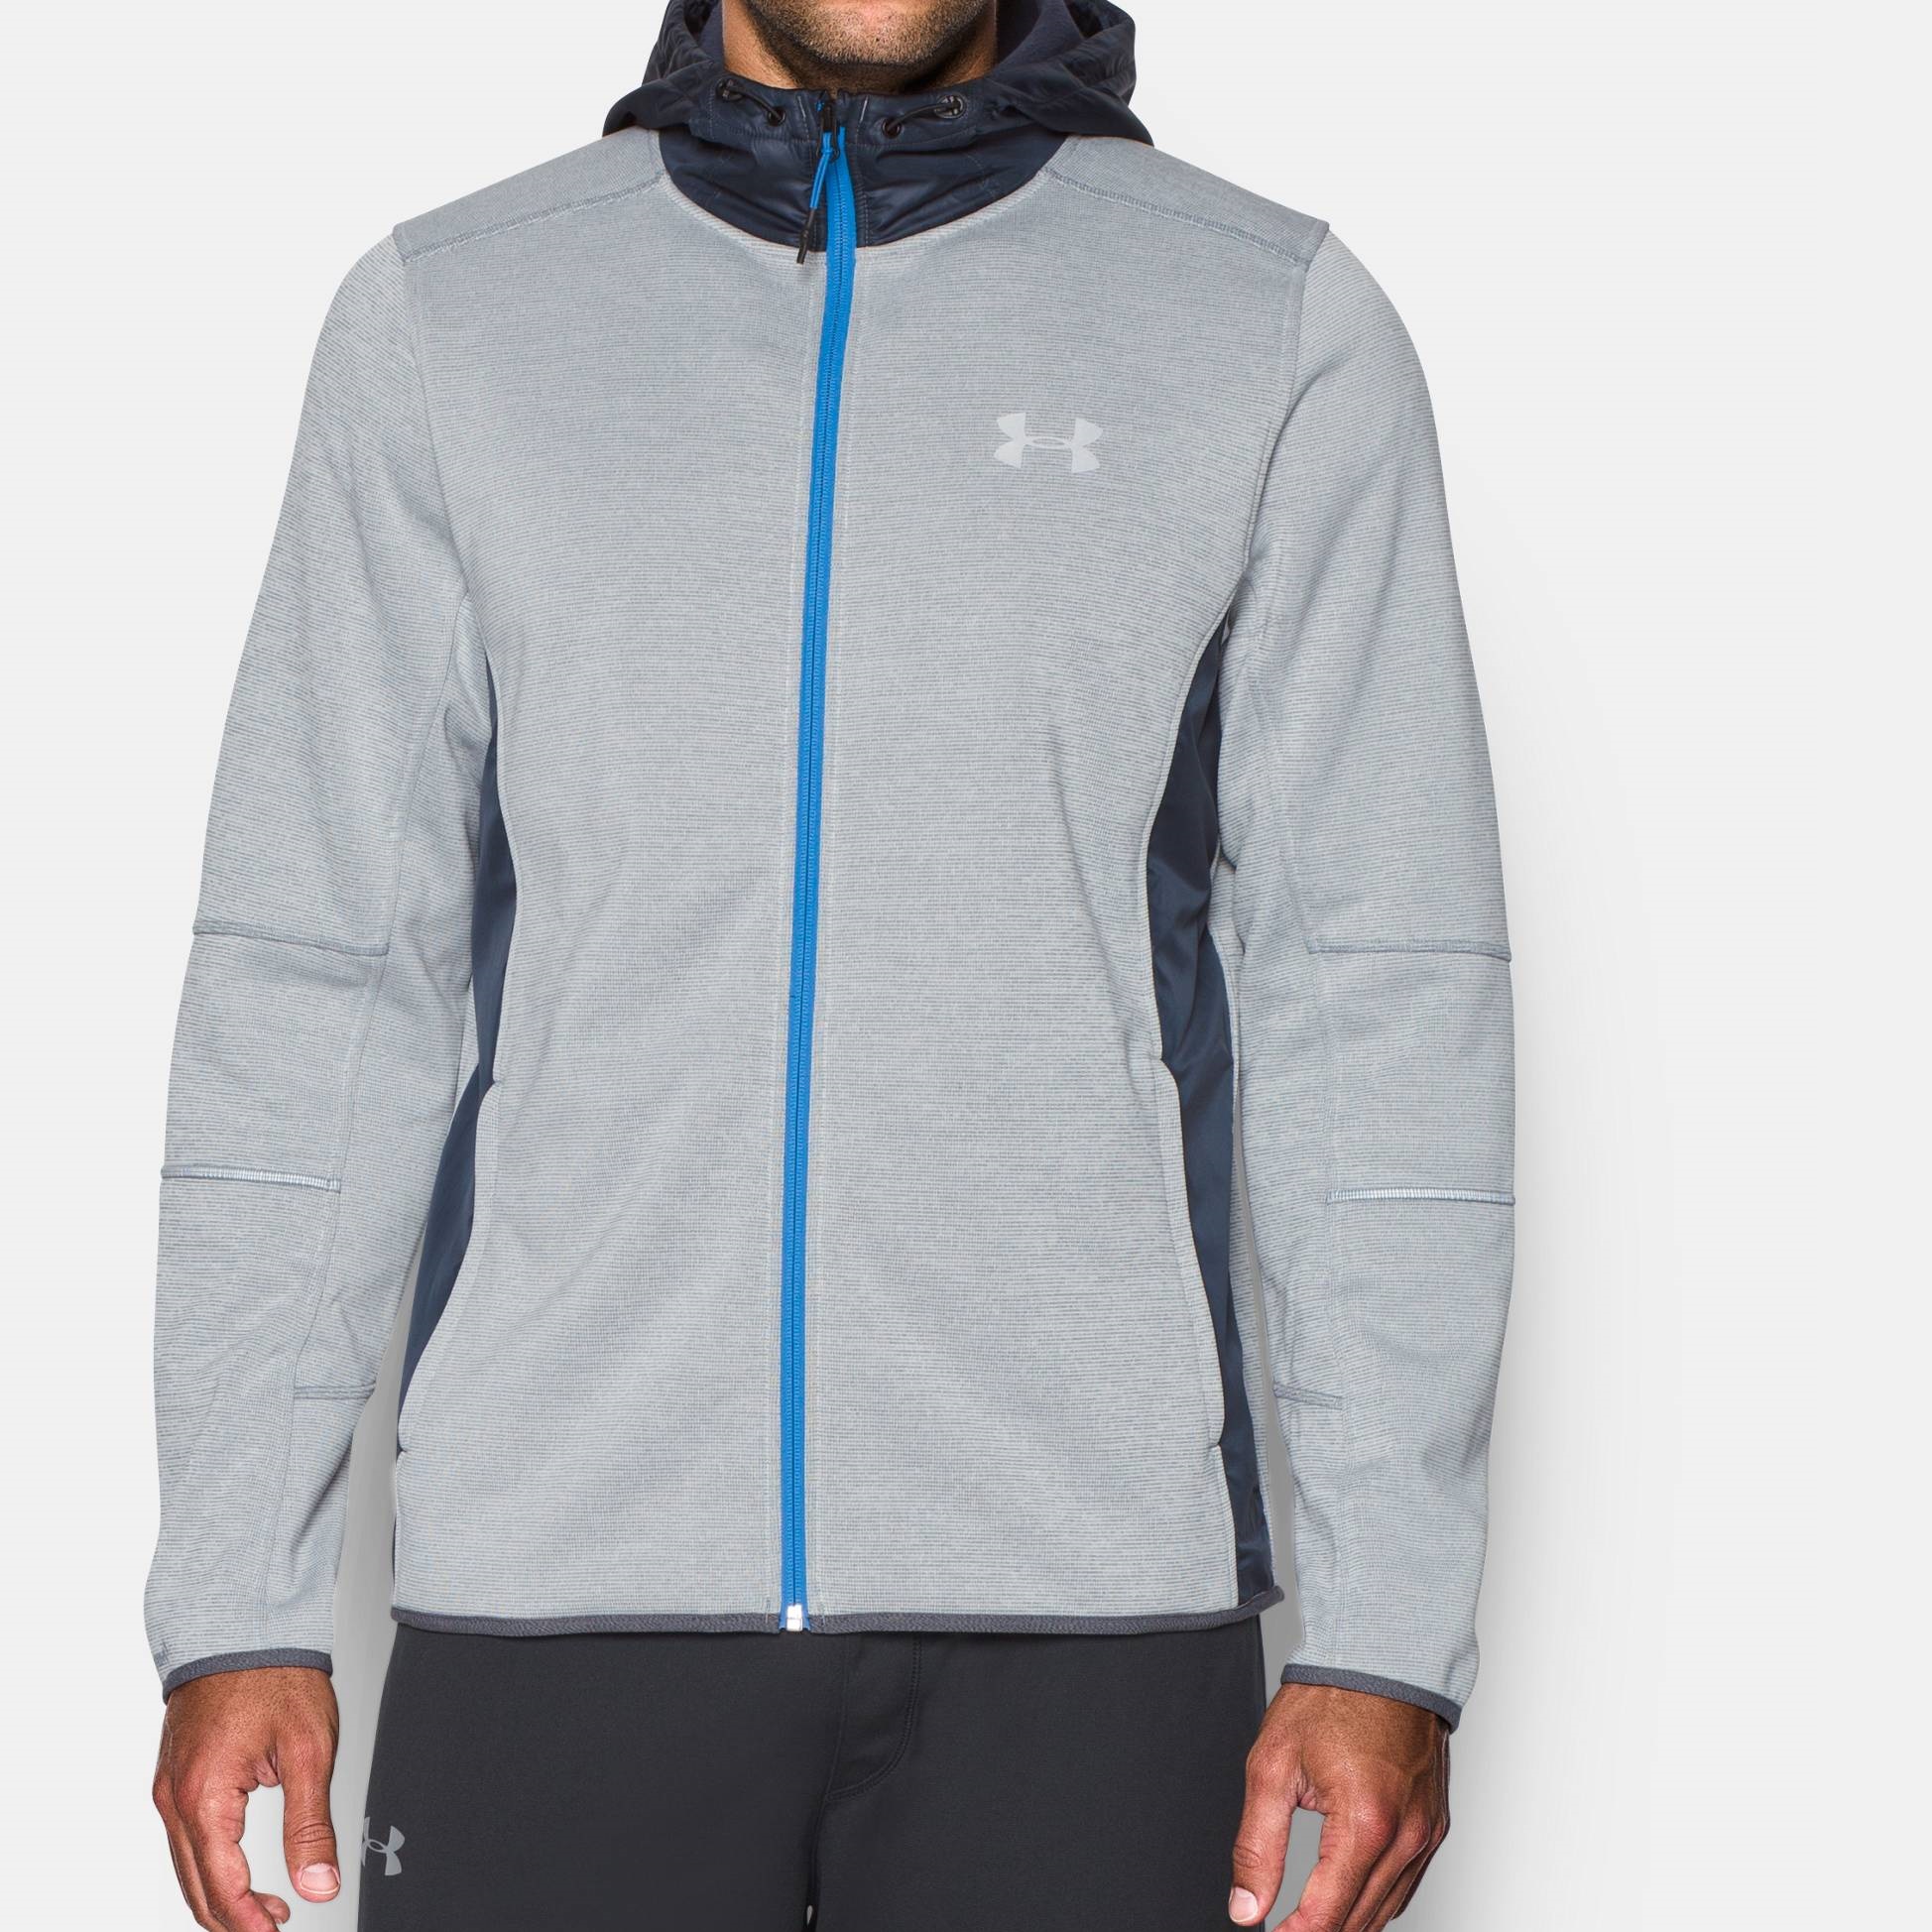  -  under armour Storm Swacket